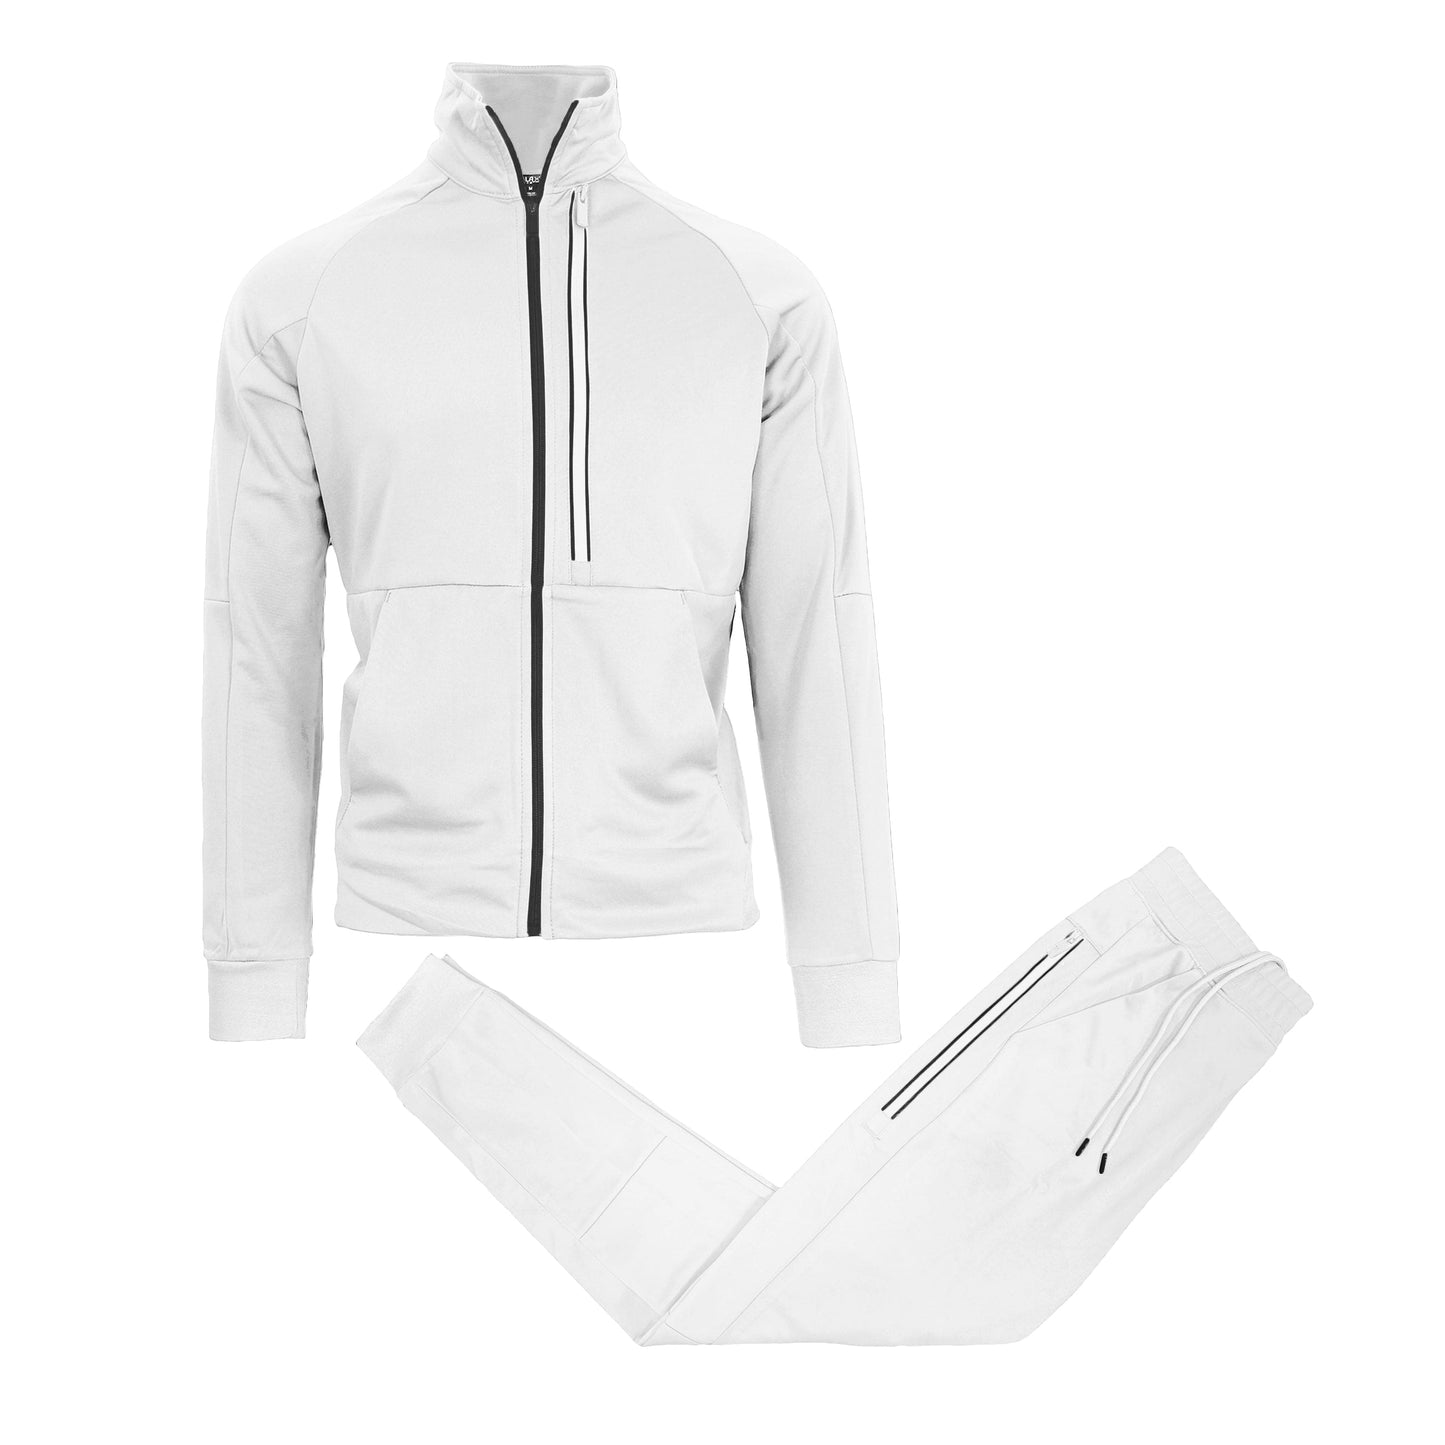 Men's Moisture Wicking Performance Active Sweater Track Jacket & Jogger 2-Piece Classic Set (Sizes, S-2XL) - GalaxybyHarvic